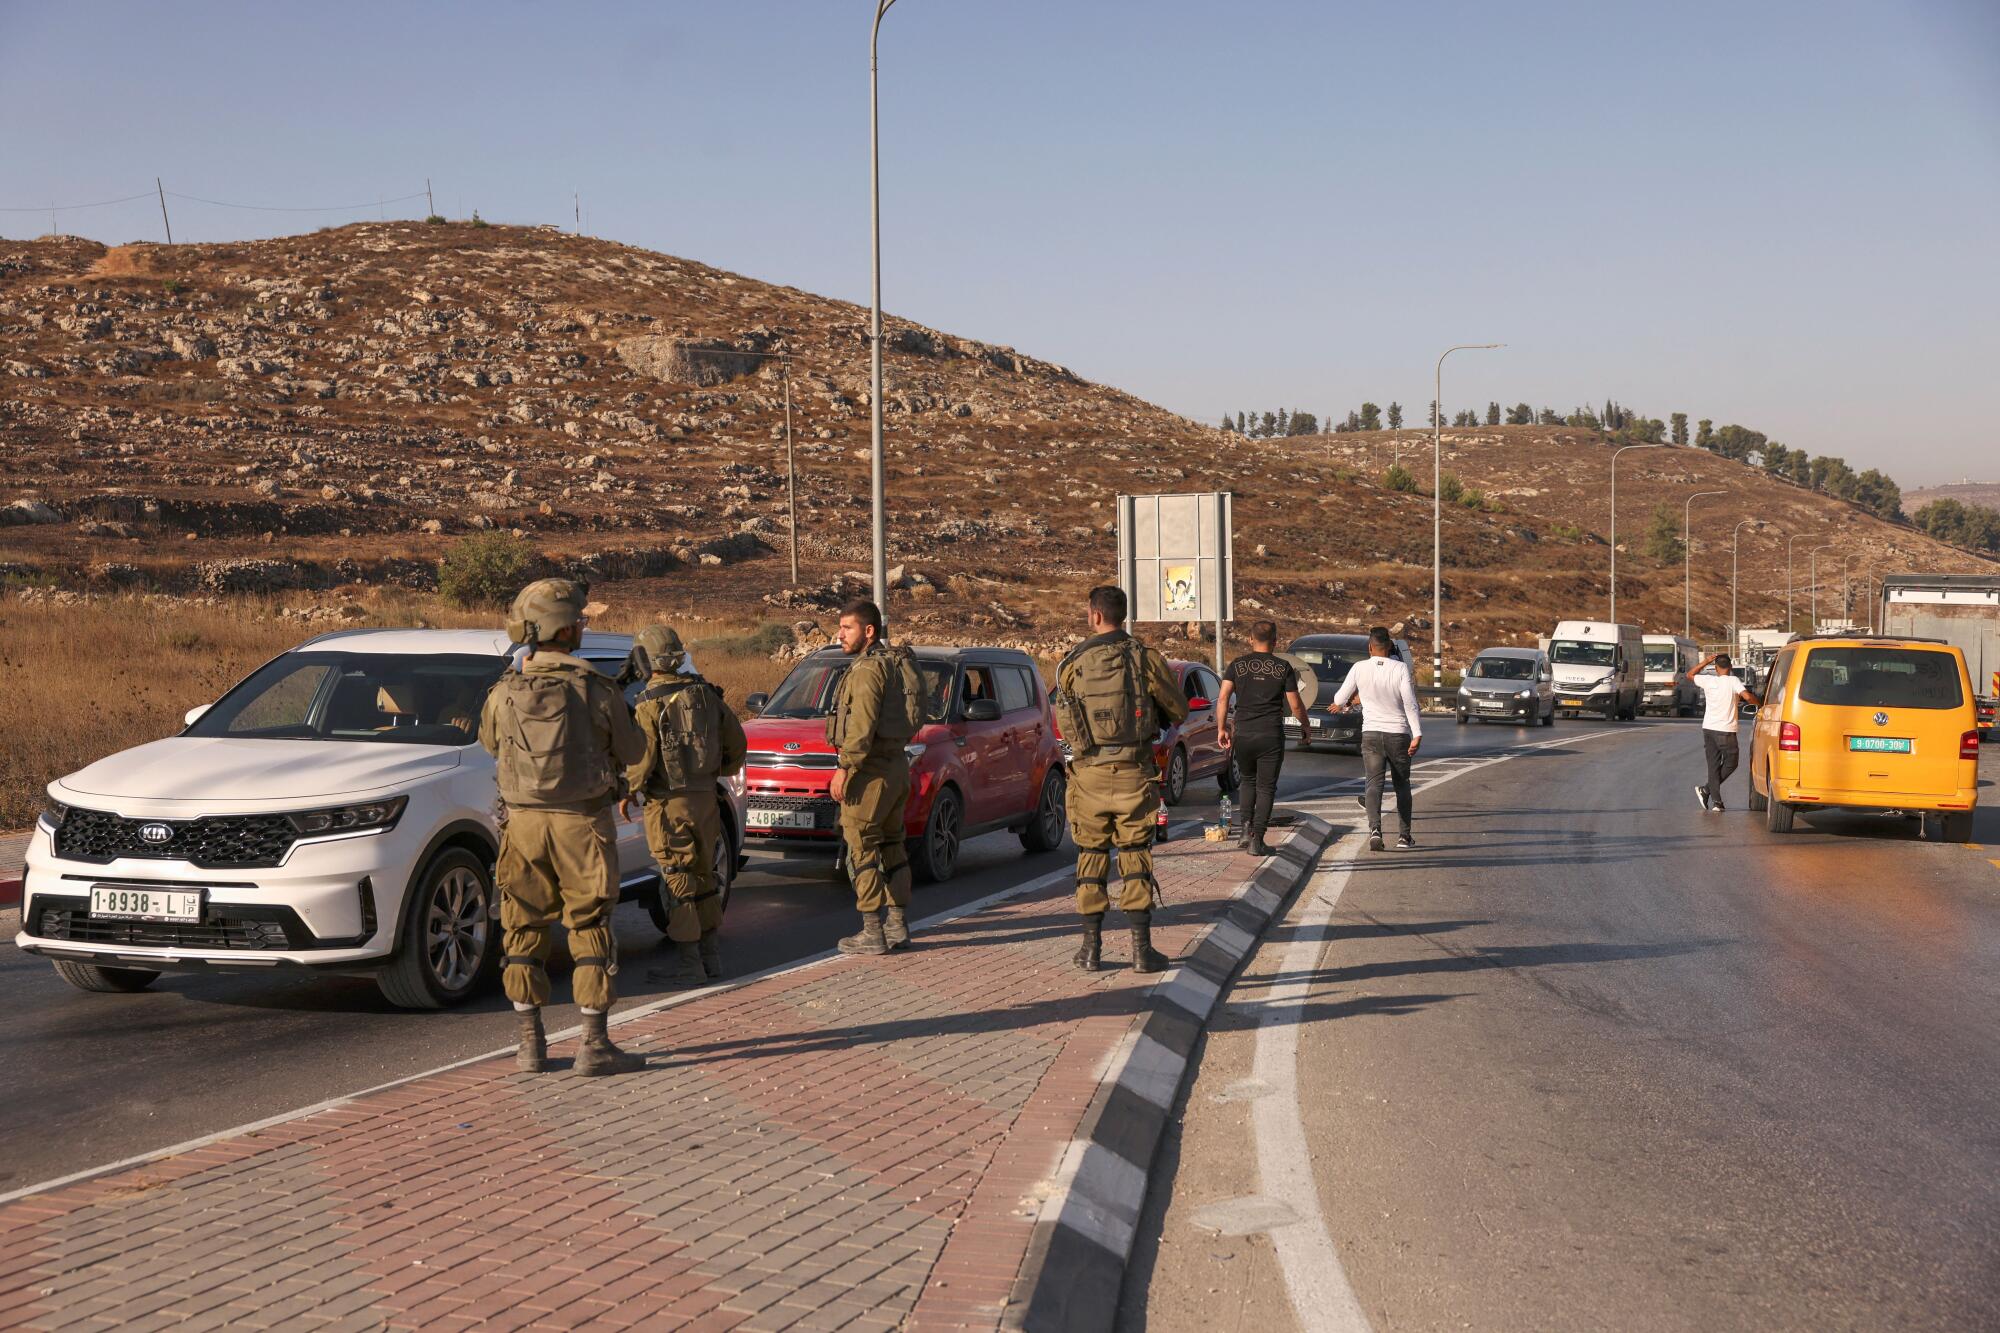 Israeli security forces operate a checkpoint at the closed-off southern entrance of Hebron in the occupied West Bank.